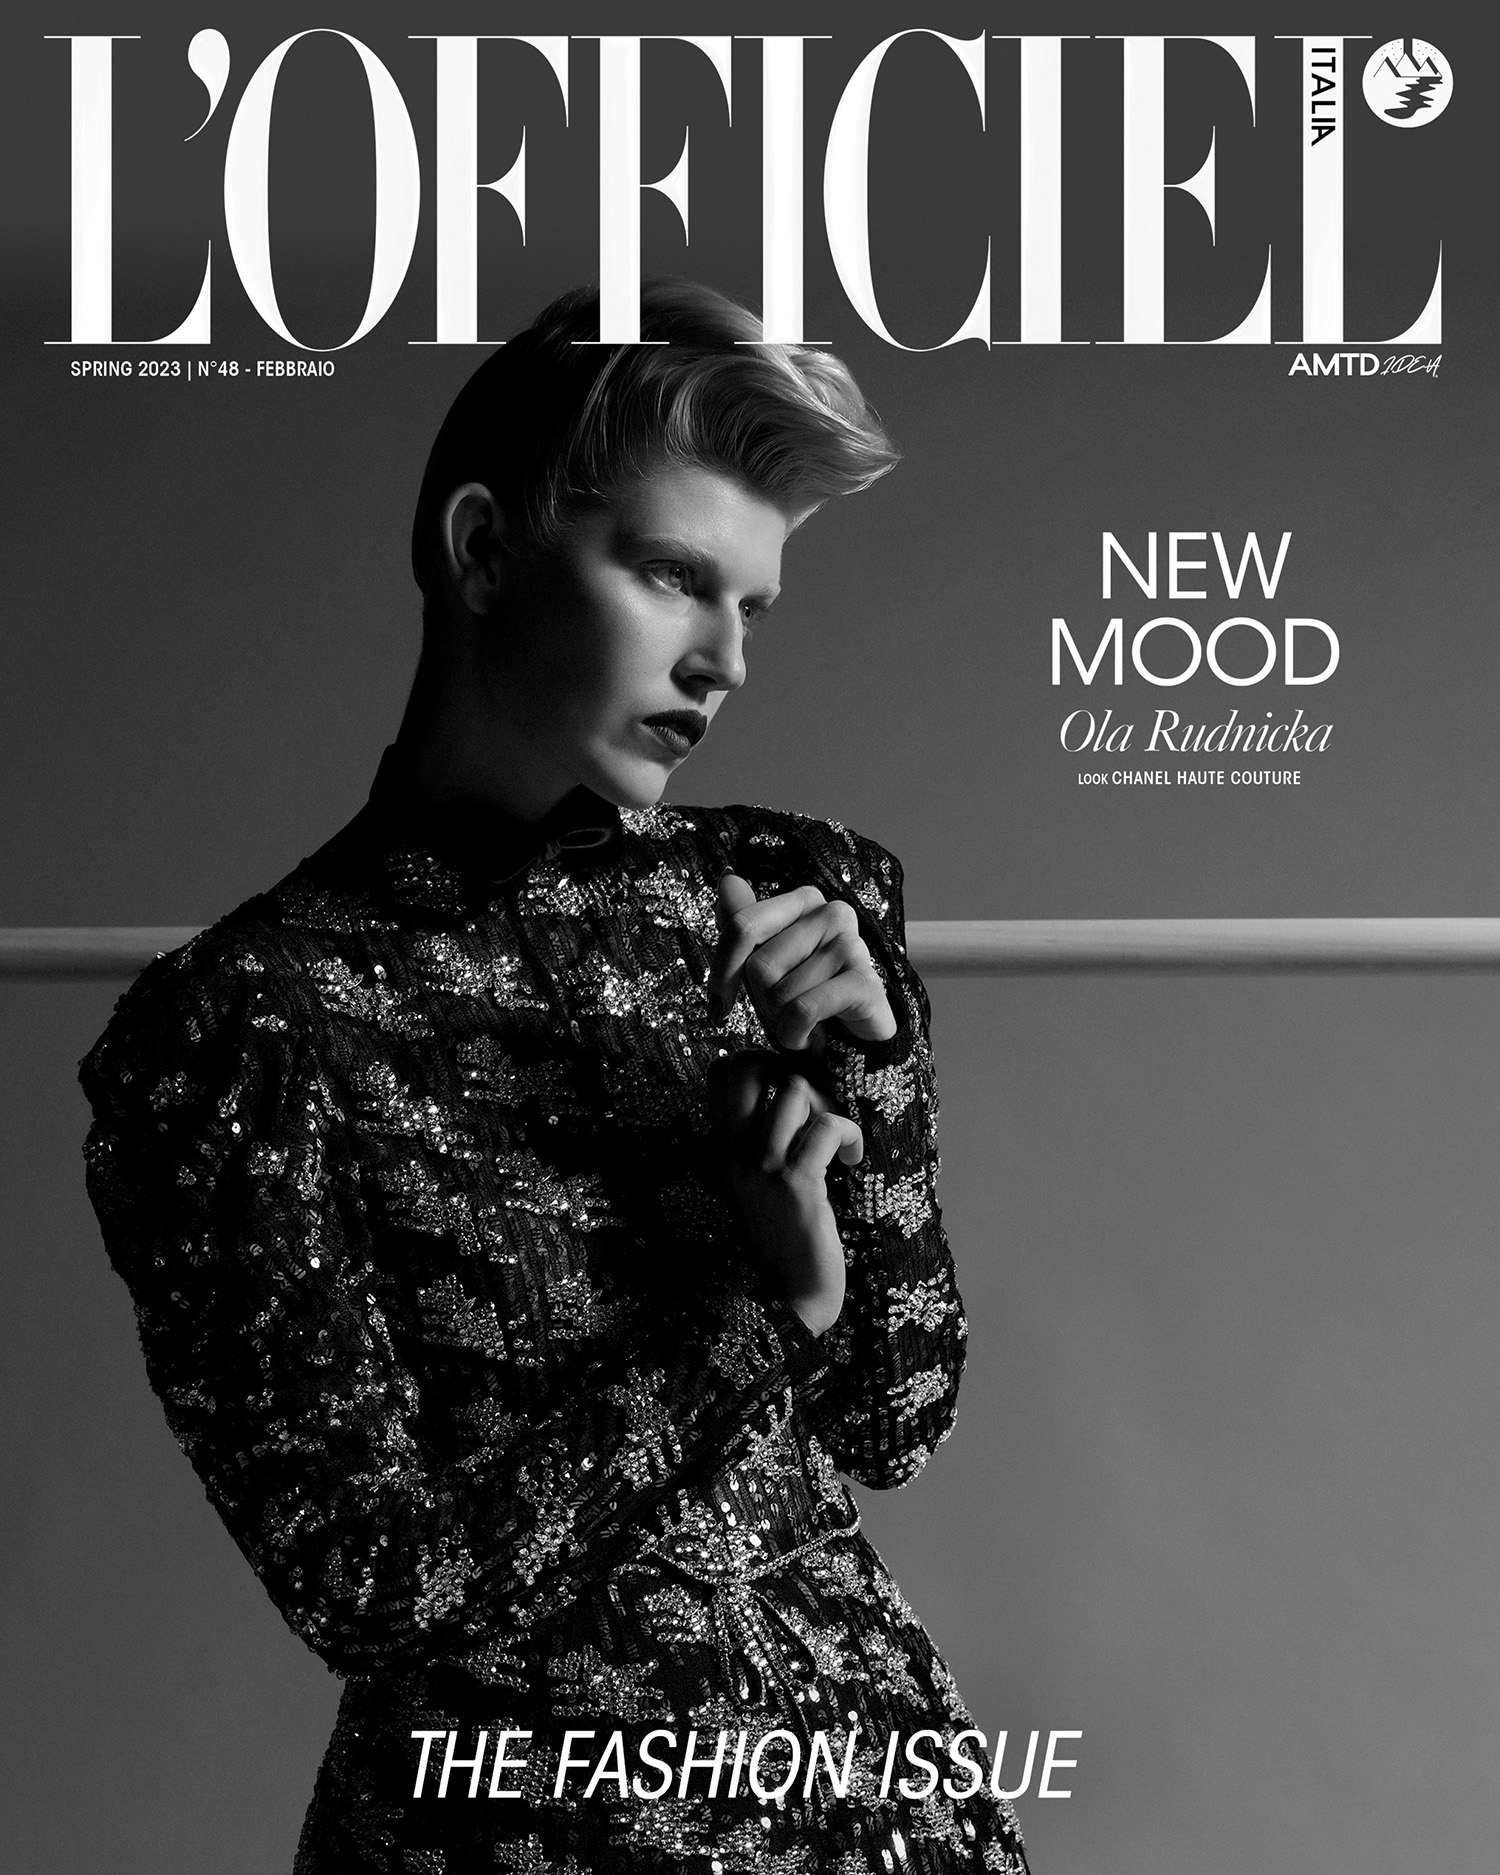 Ola Rudnicka covers L’Officiel Italia Issue 48 by Vincent Flouret